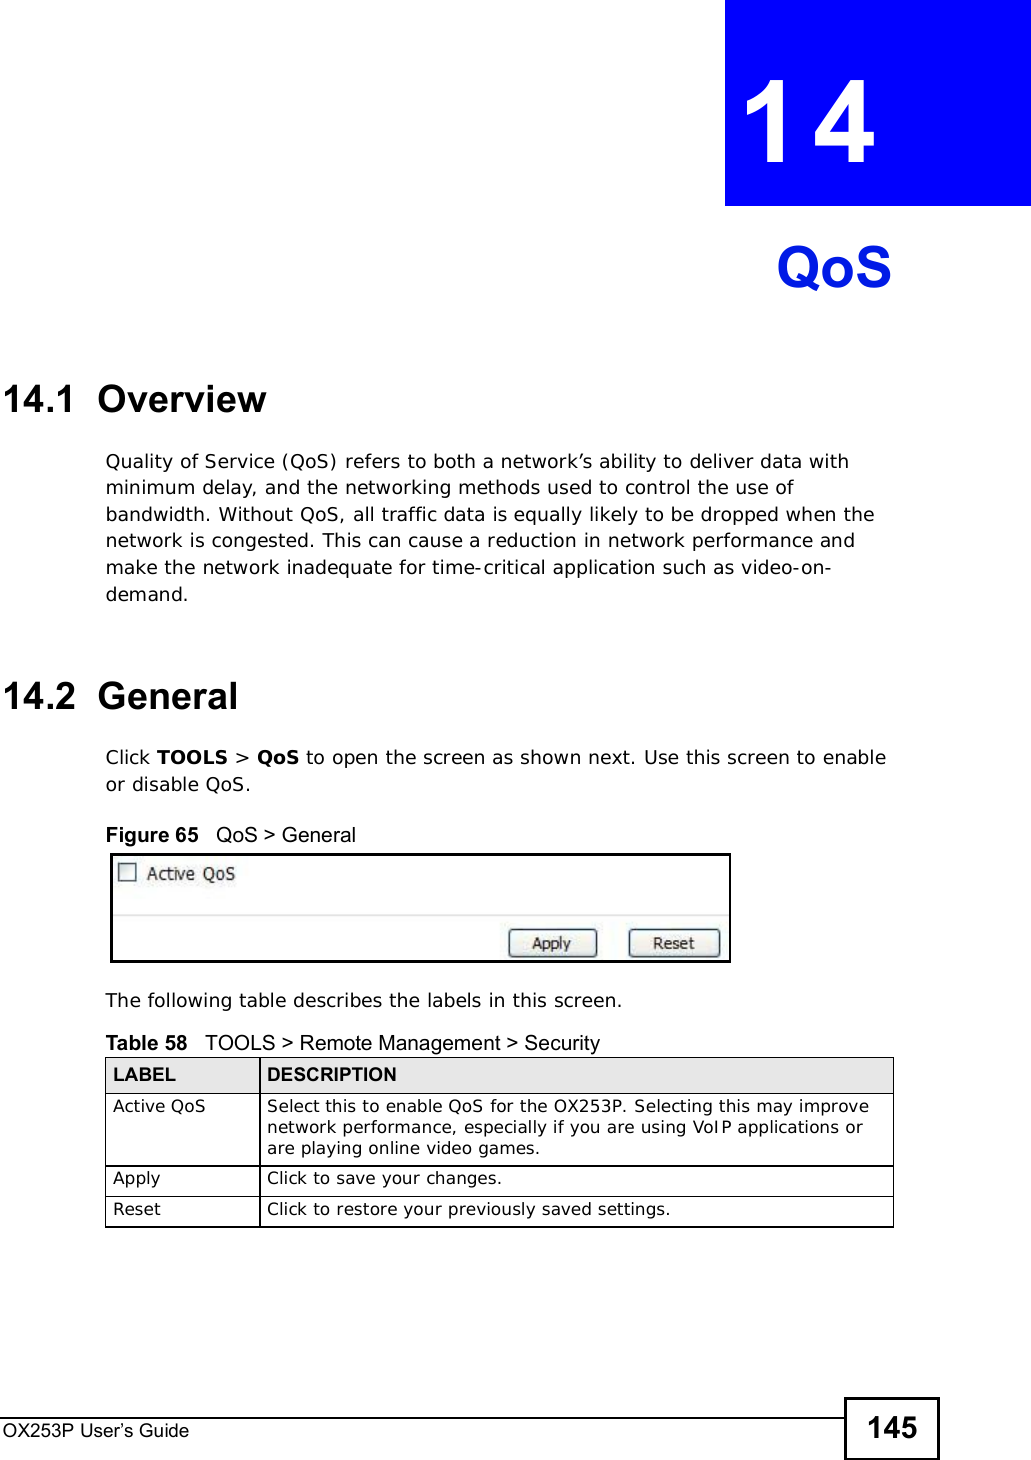 OX253P User’s Guide 145CHAPTER 14QoS14.1  OverviewQuality of Service (QoS) refers to both a network’s ability to deliver data with minimum delay, and the networking methods used to control the use of bandwidth. Without QoS, all traffic data is equally likely to be dropped when the network is congested. This can cause a reduction in network performance and make the network inadequate for time-critical application such as video-on-demand.14.2  GeneralClick TOOLS &gt; QoS to open the screen as shown next. Use this screen to enable or disable QoS.Figure 65   QoS &gt; GeneralThe following table describes the labels in this screen.Table 58   TOOLS &gt; Remote Management &gt; SecurityLABEL DESCRIPTIONActive QoS Select this to enable QoS for the OX253P. Selecting this may improve network performance, especially if you are using VoIP applications or are playing online video games.Apply Click to save your changes.Reset Click to restore your previously saved settings.